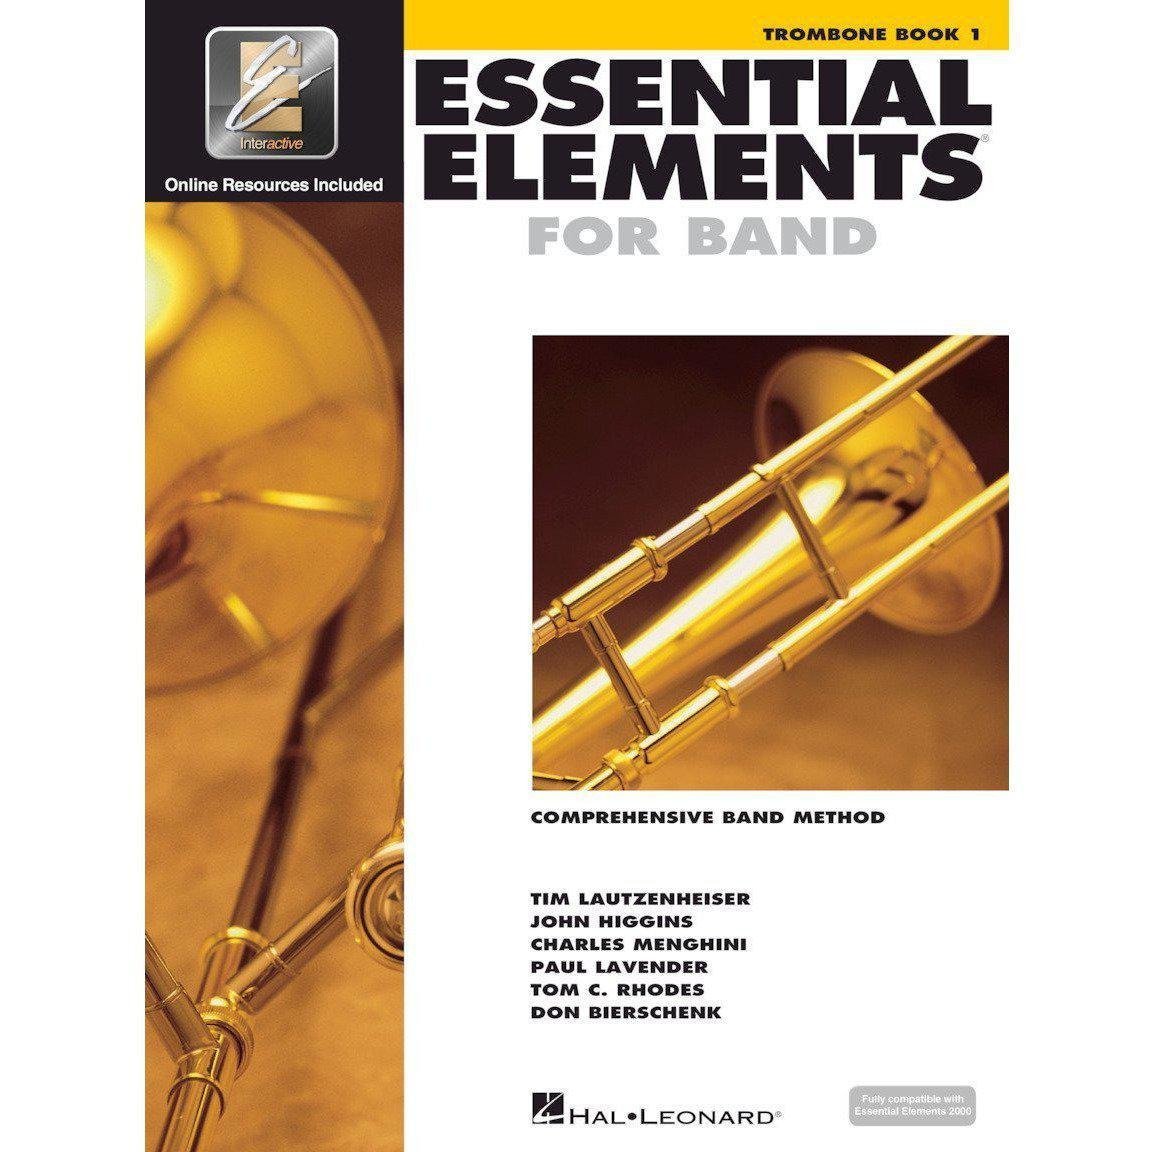 Essential Elements for Band Book 1-Trombone-Andy's Music